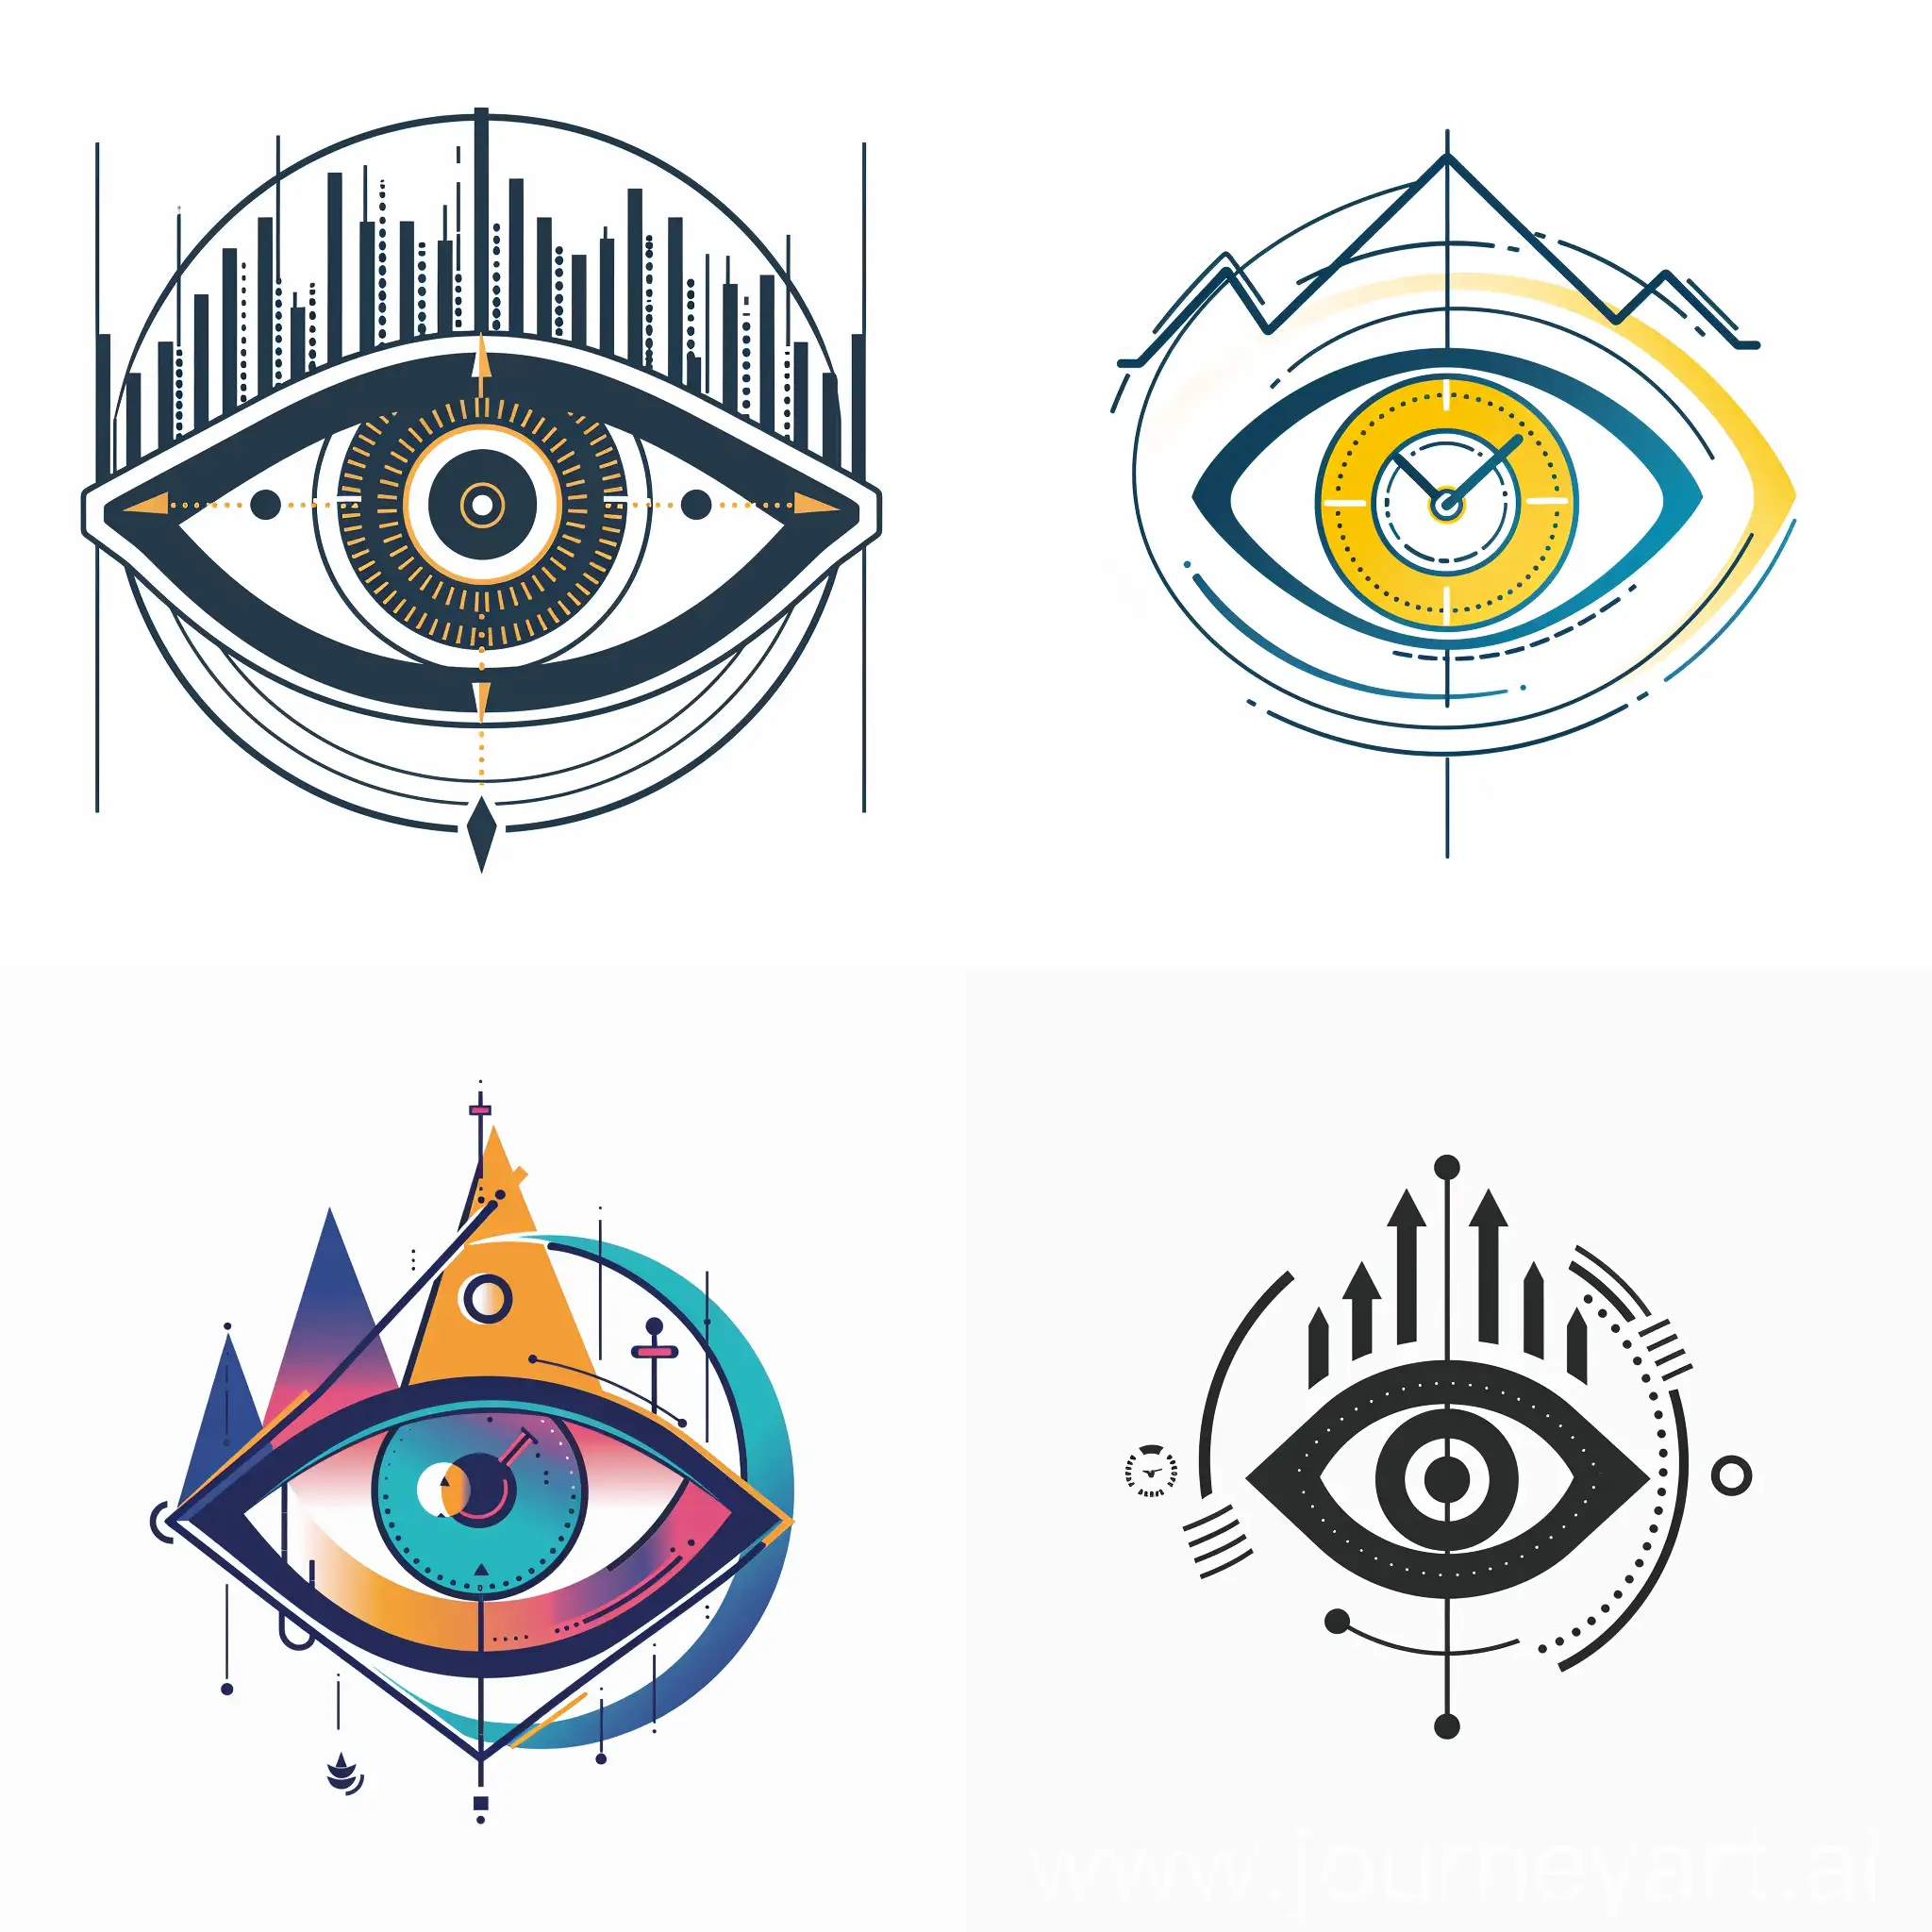 Stylized-Eye-Growth-Symbol-with-Ascending-Line-Graph-for-Digital-Marketing-Agency